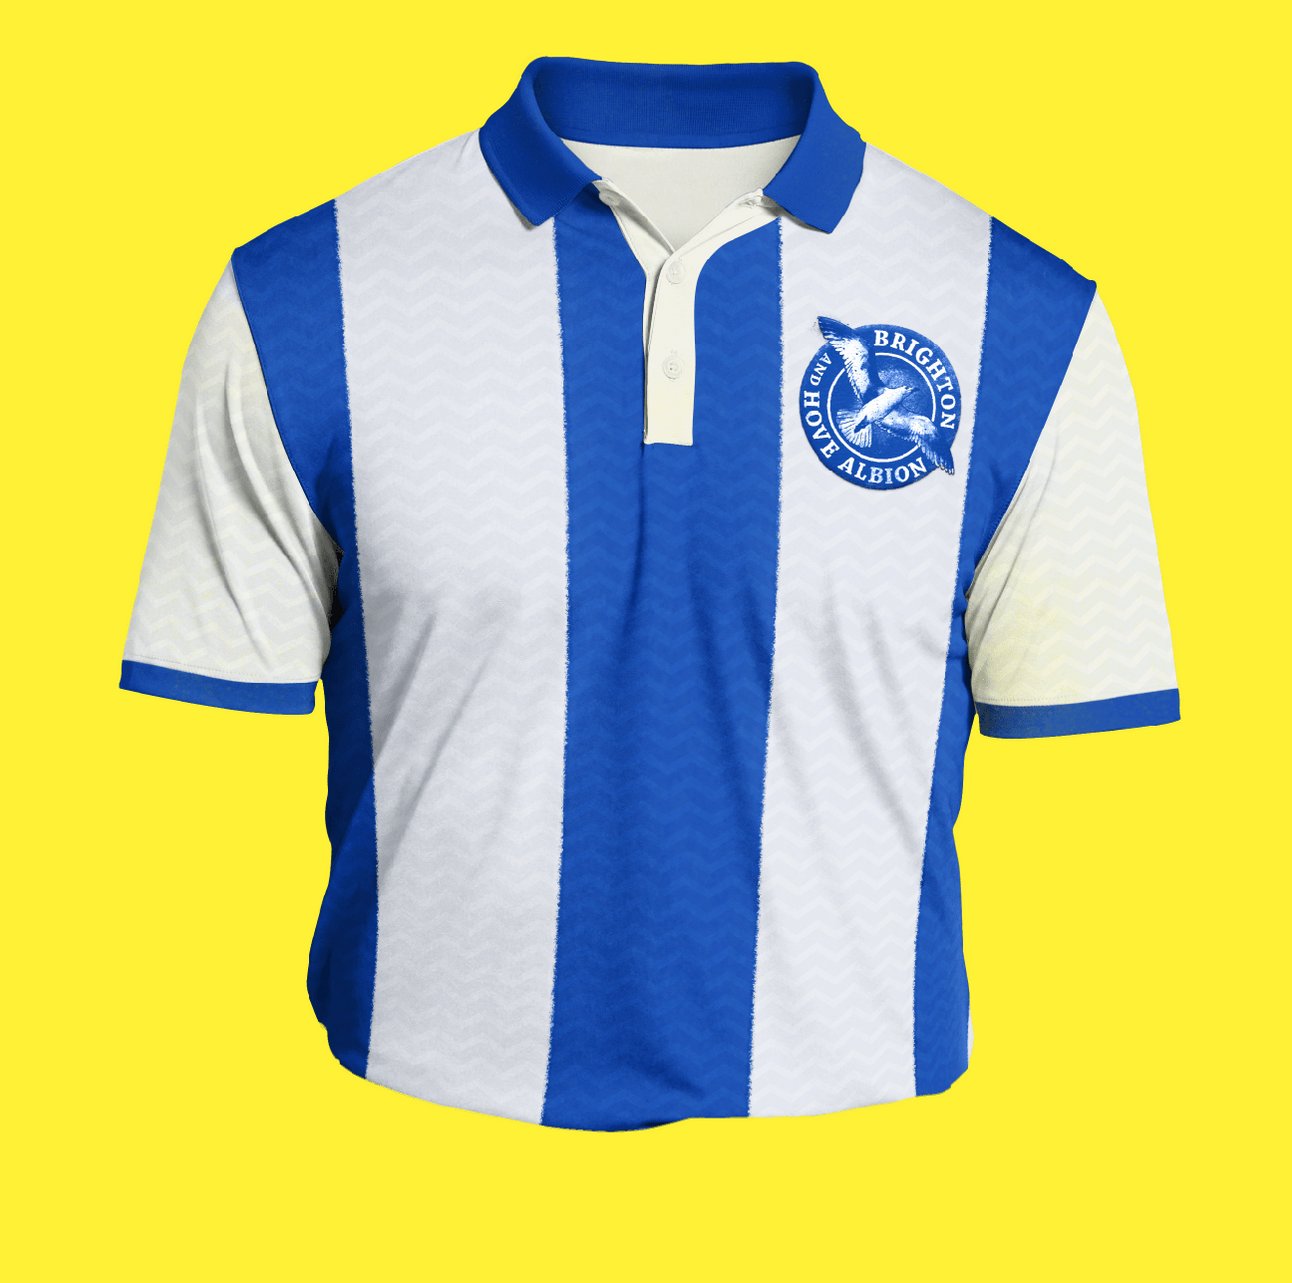 Daniel Norris on X: Back in 1985 the planets aligned to create one of the  best football shirts everwould be great to get another adidas kit one  day. #design #football #qpr #shirt #